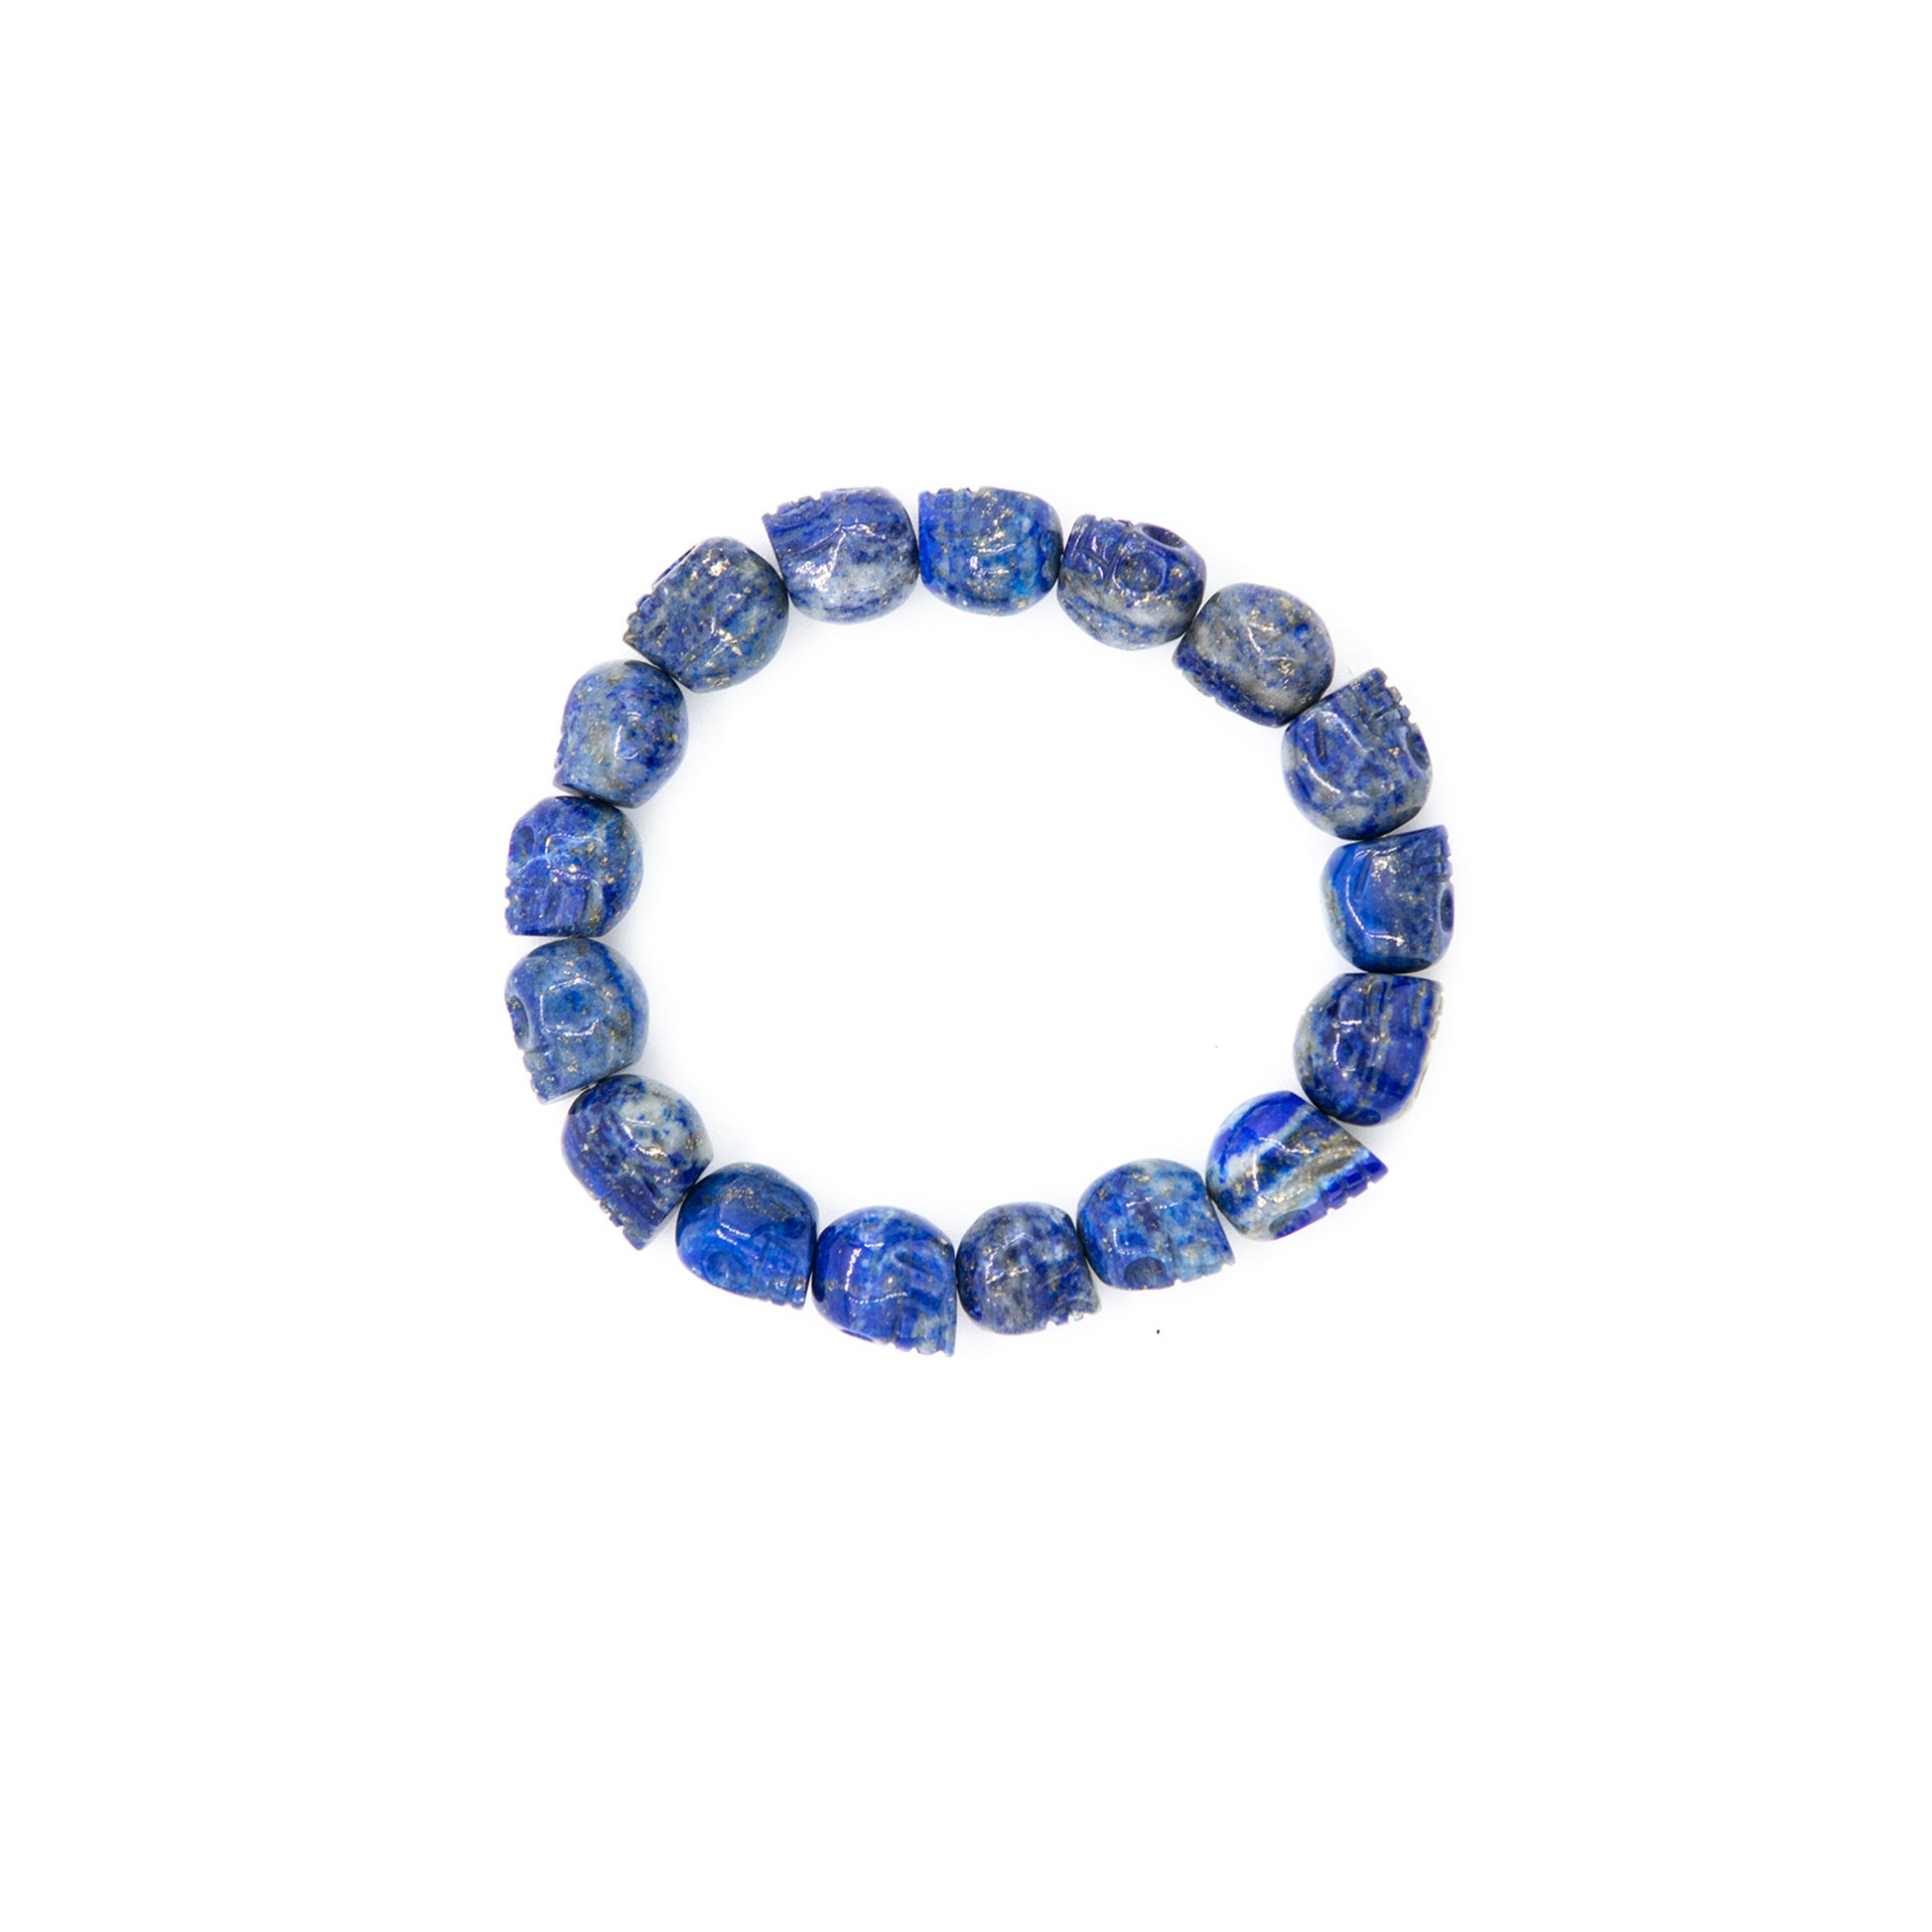 Lapis Lazuli Skull Bracelet.  Very cool, carved blue lapis miniature skull beads strung on stretch cord. Beautiful color.  One size fits most. You will receive one similar to the ones pictured. Skulls are about 3/8 inch in diameter and nicely carved.